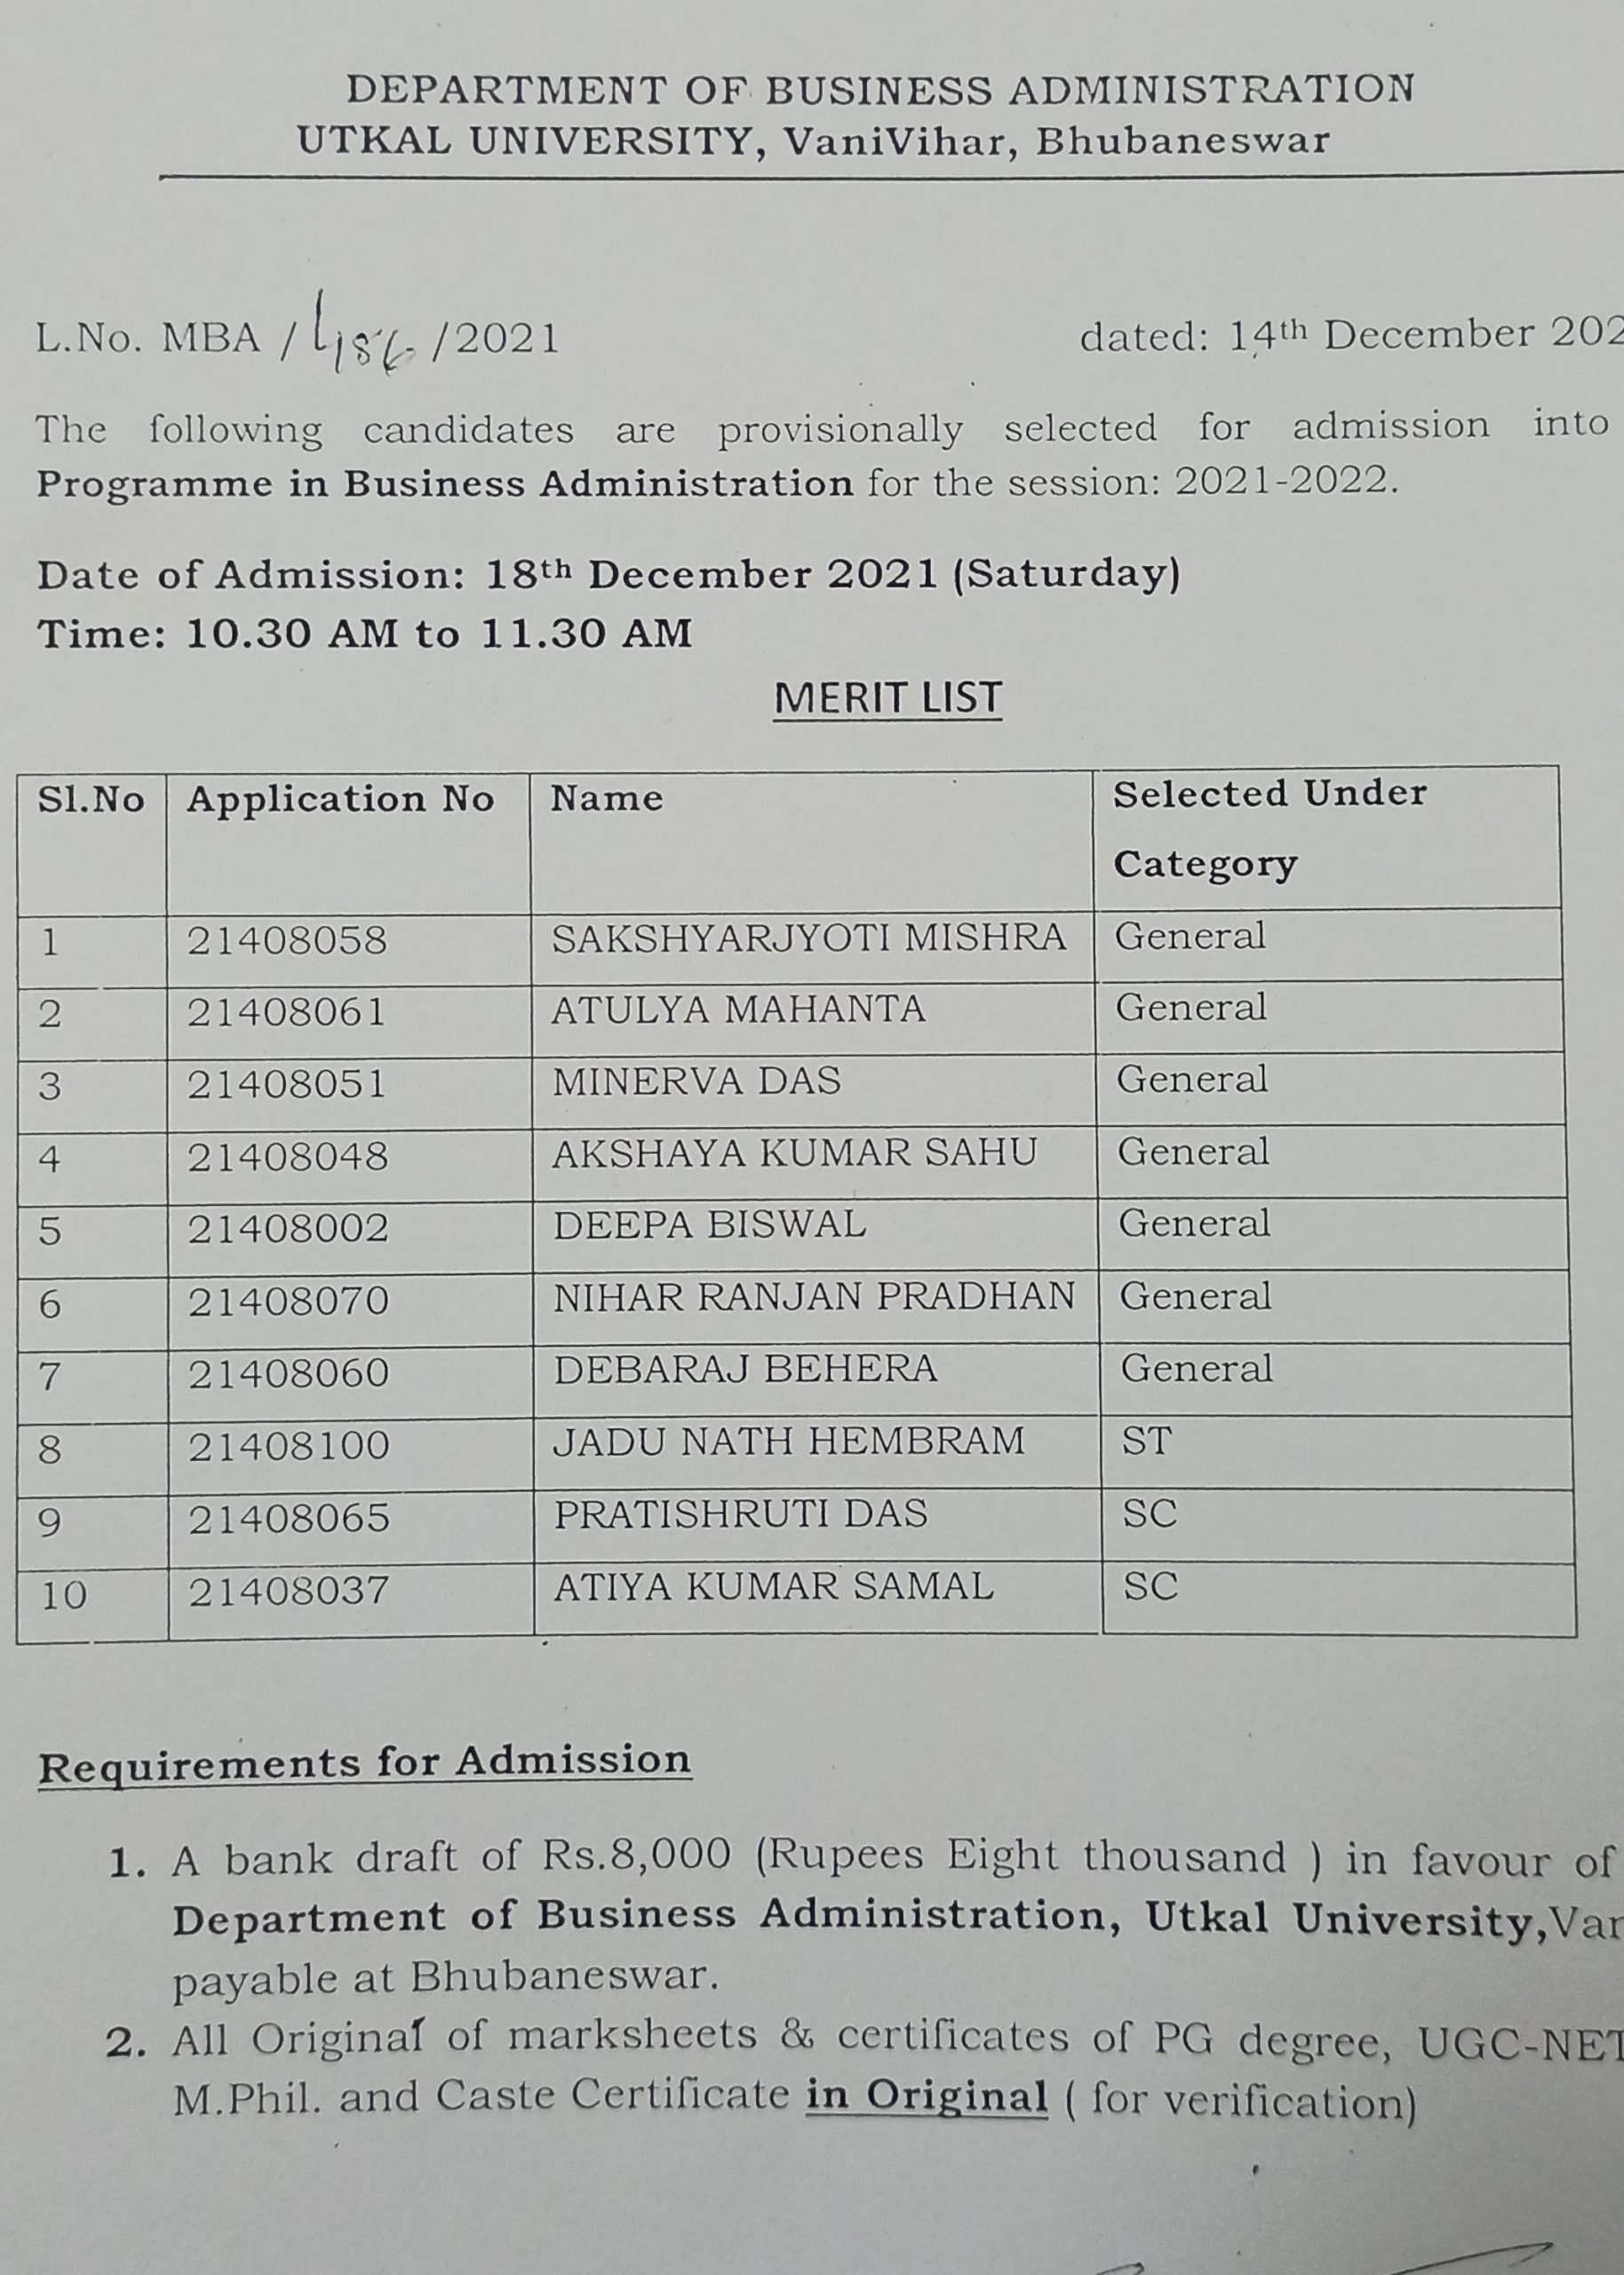 Candidates are selected for admission 2021